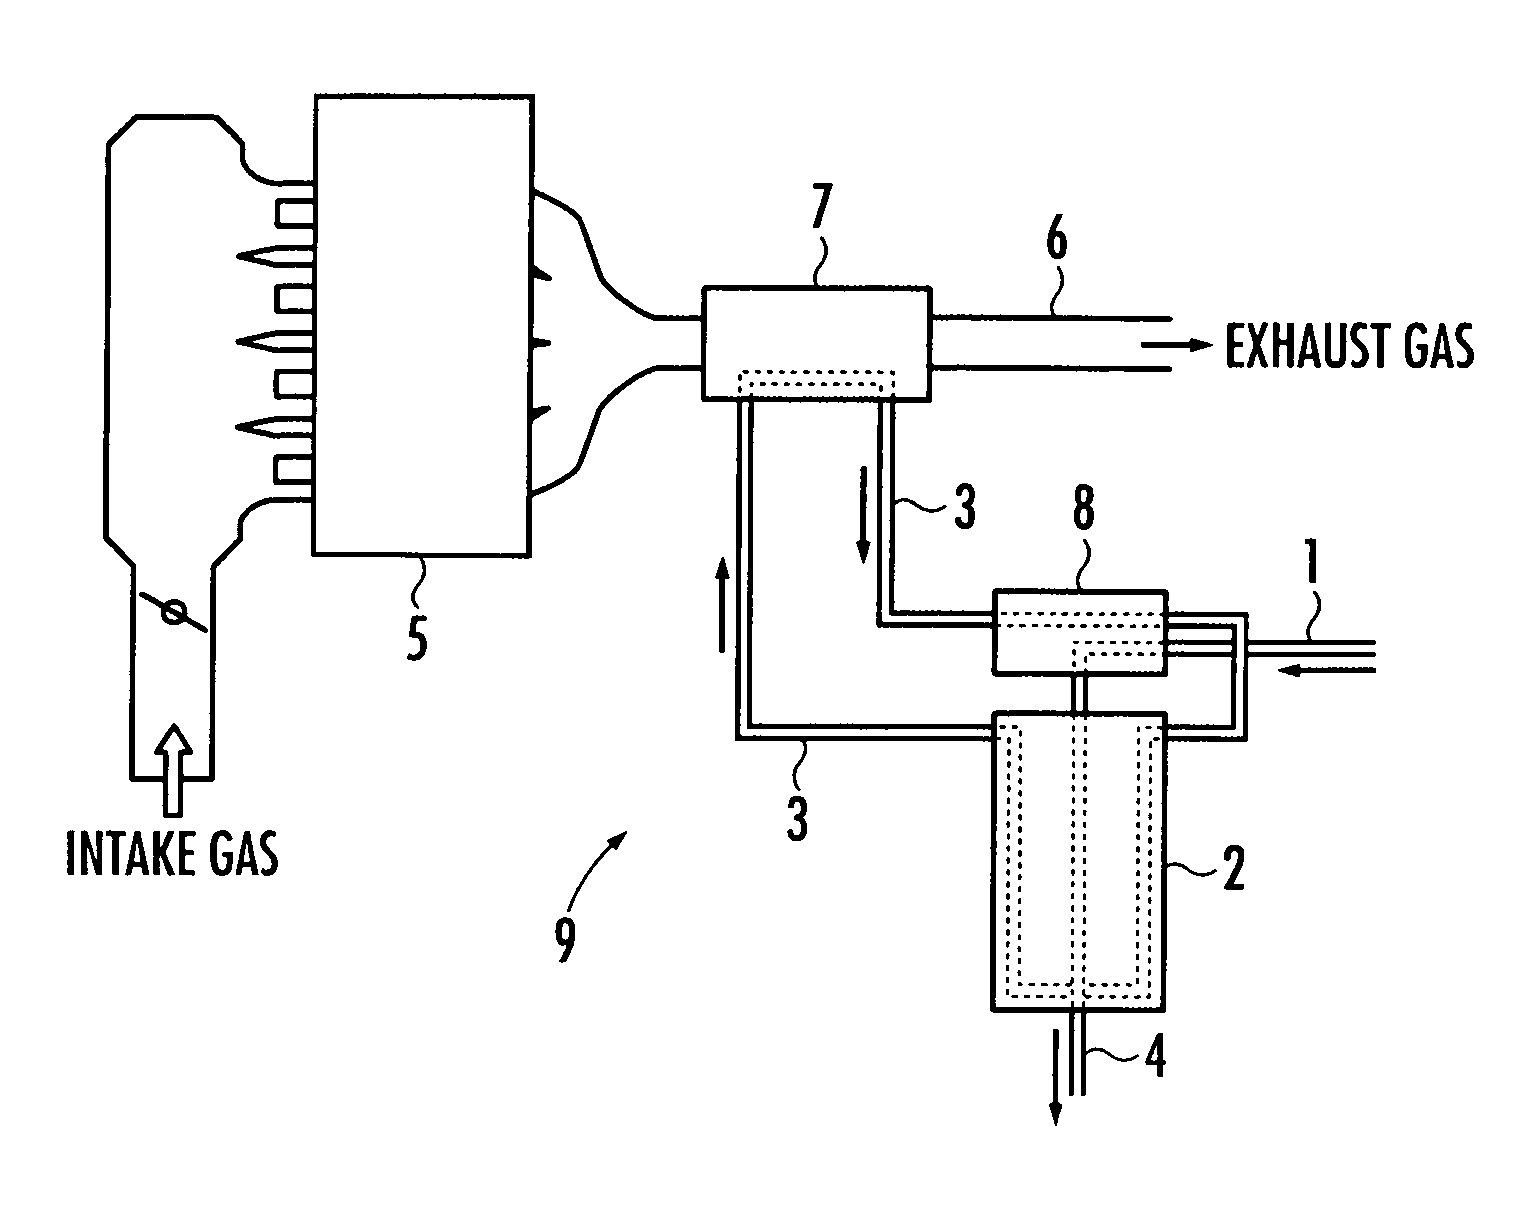 Ethanol fuel reforming system for internal combustion engines